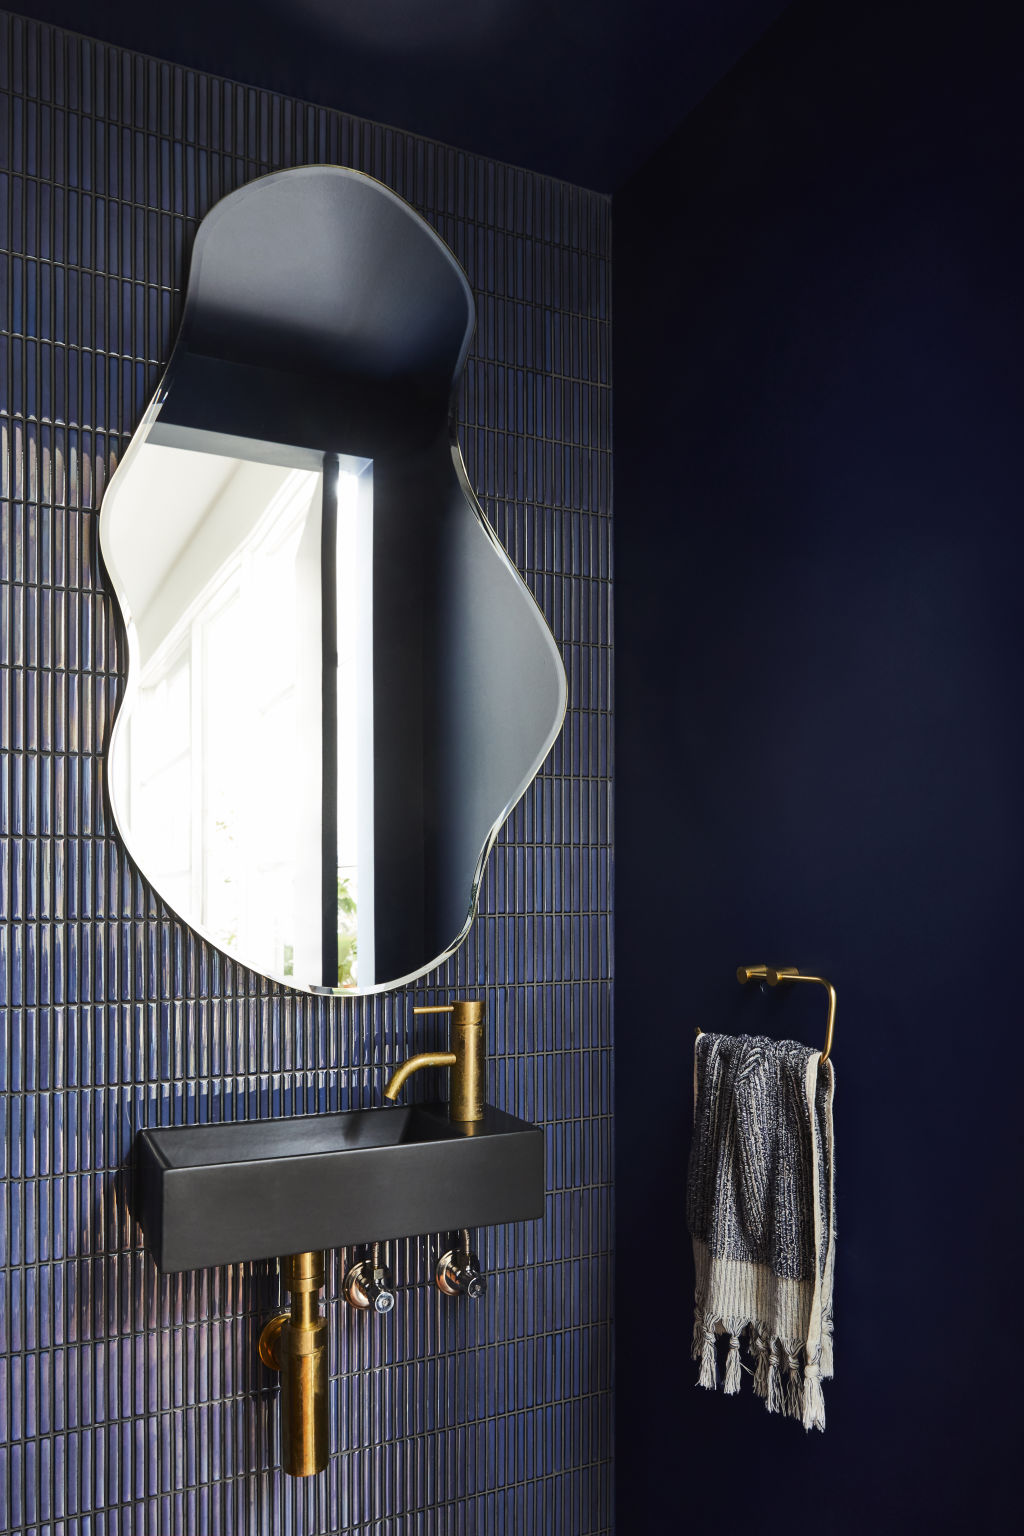 The small powder room makes a statement. Photo: Armelle Habib